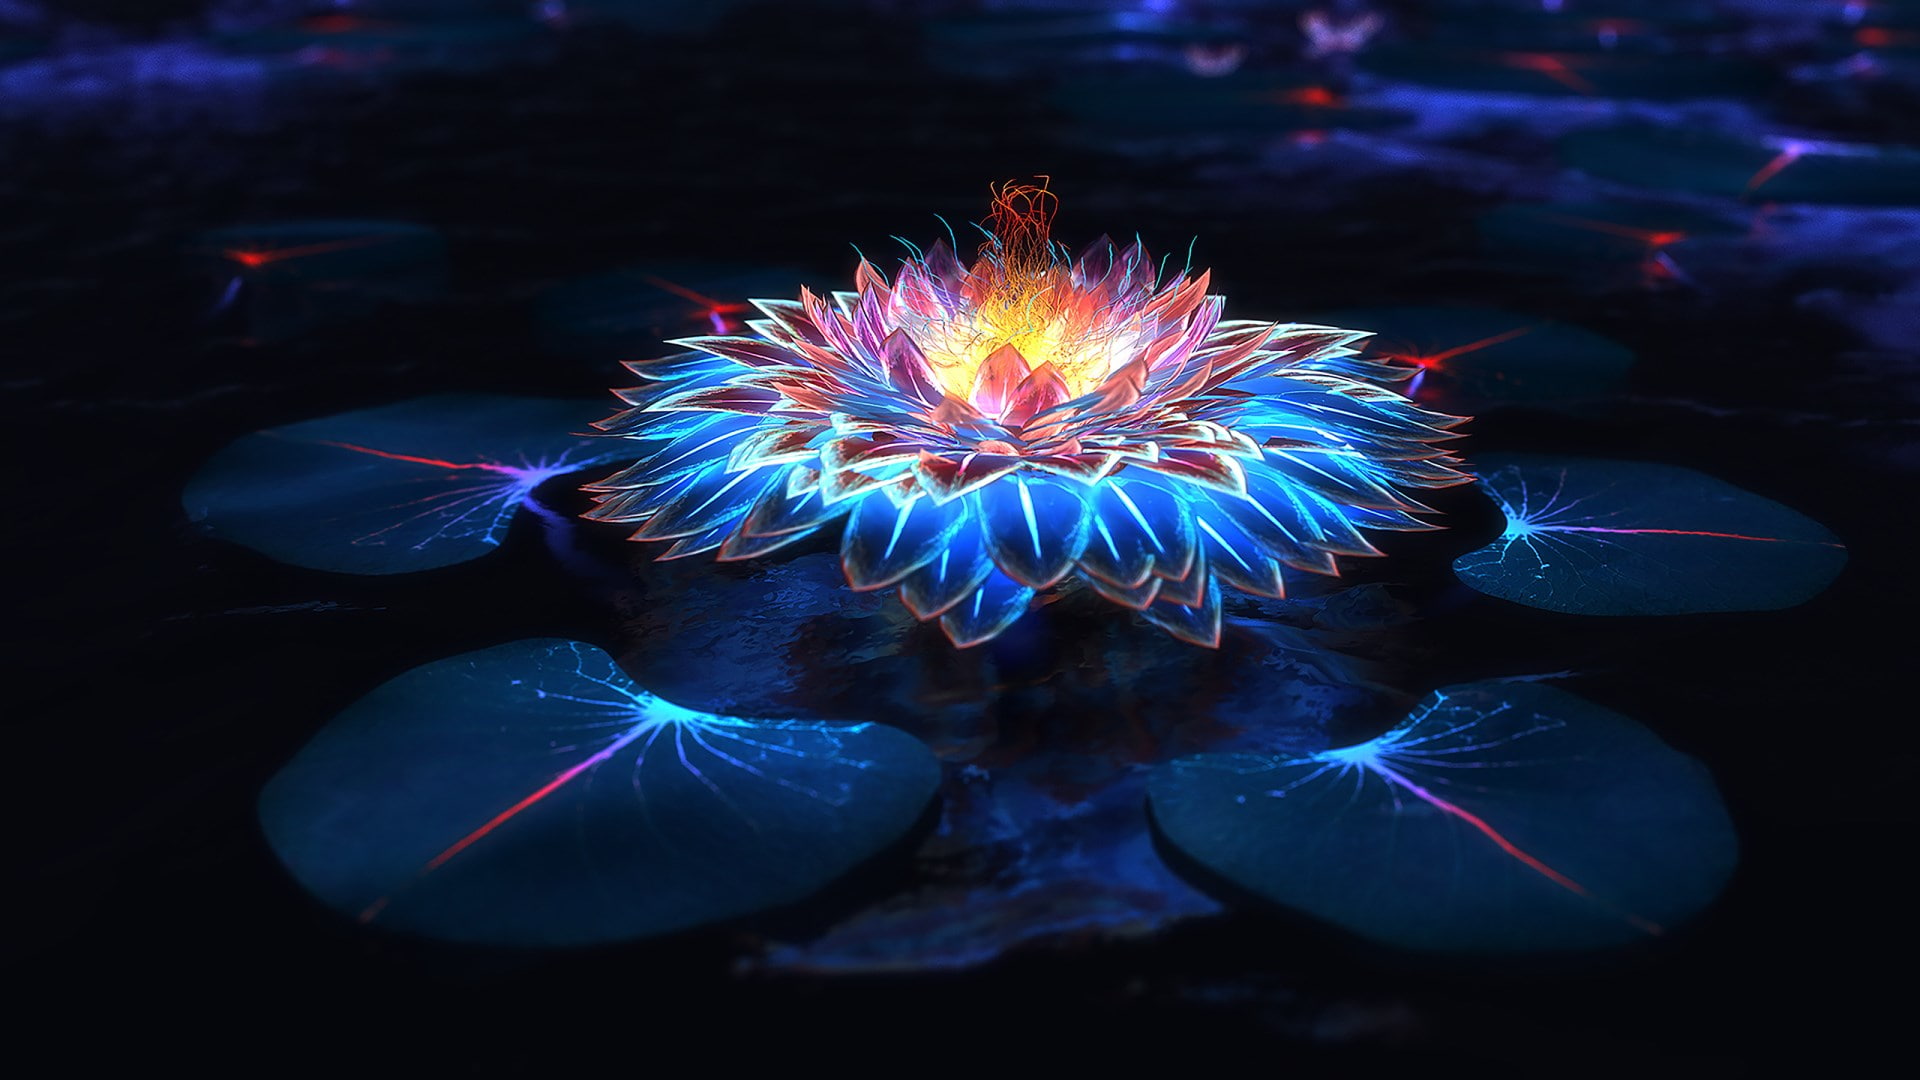 psychedelic, abstract, flower, fantasy art, nature, water, sea